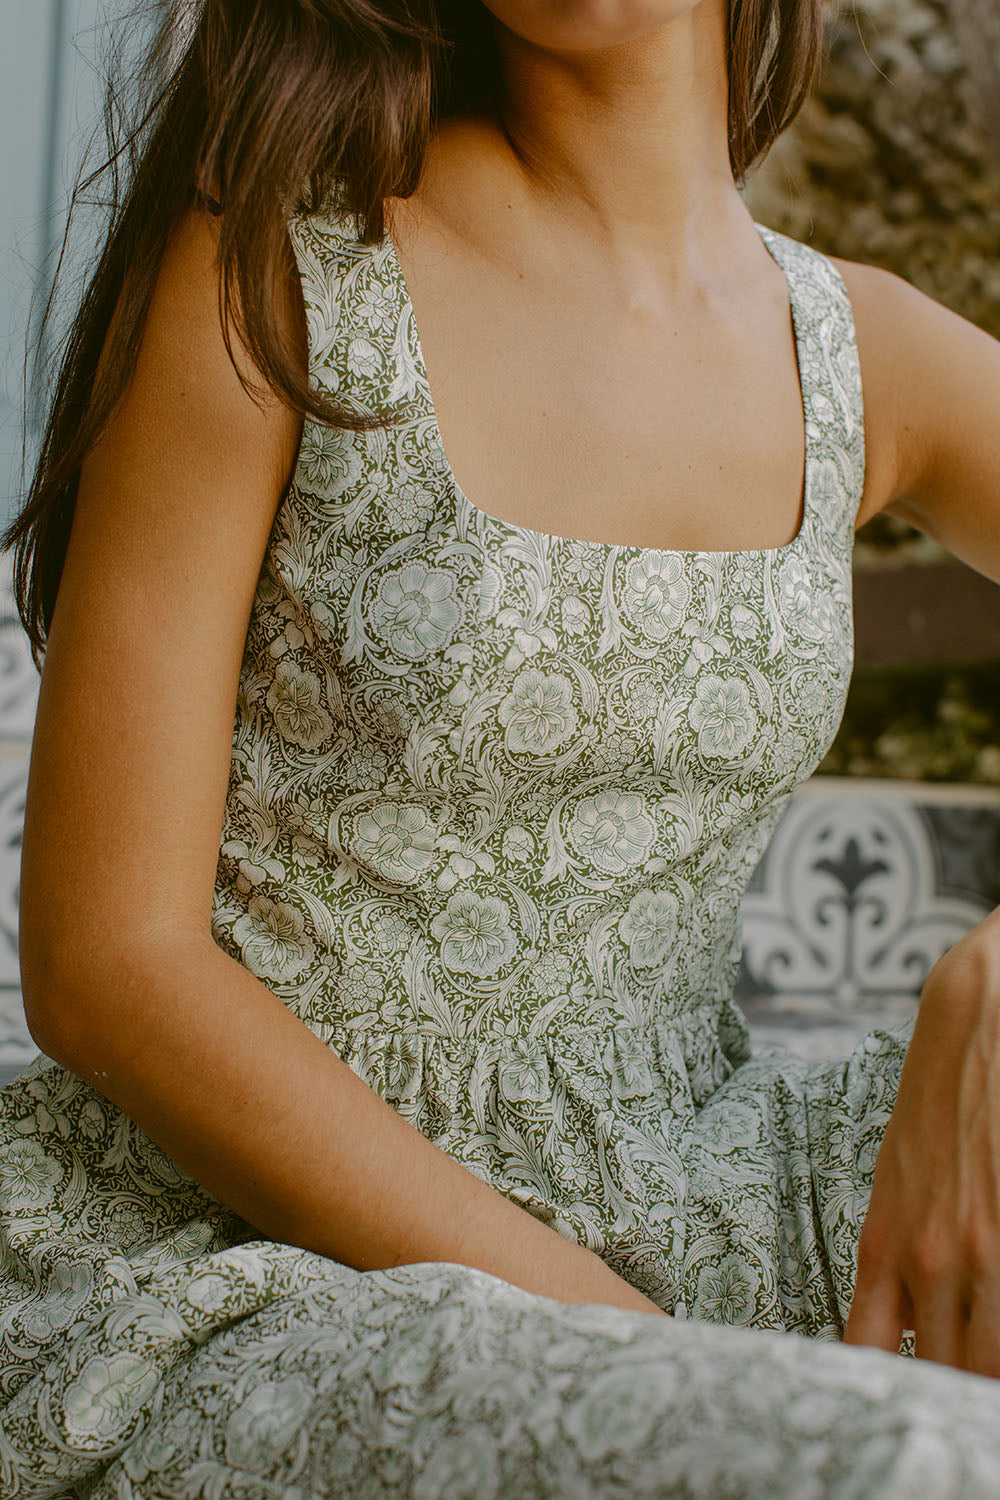 Woman in green floral dress